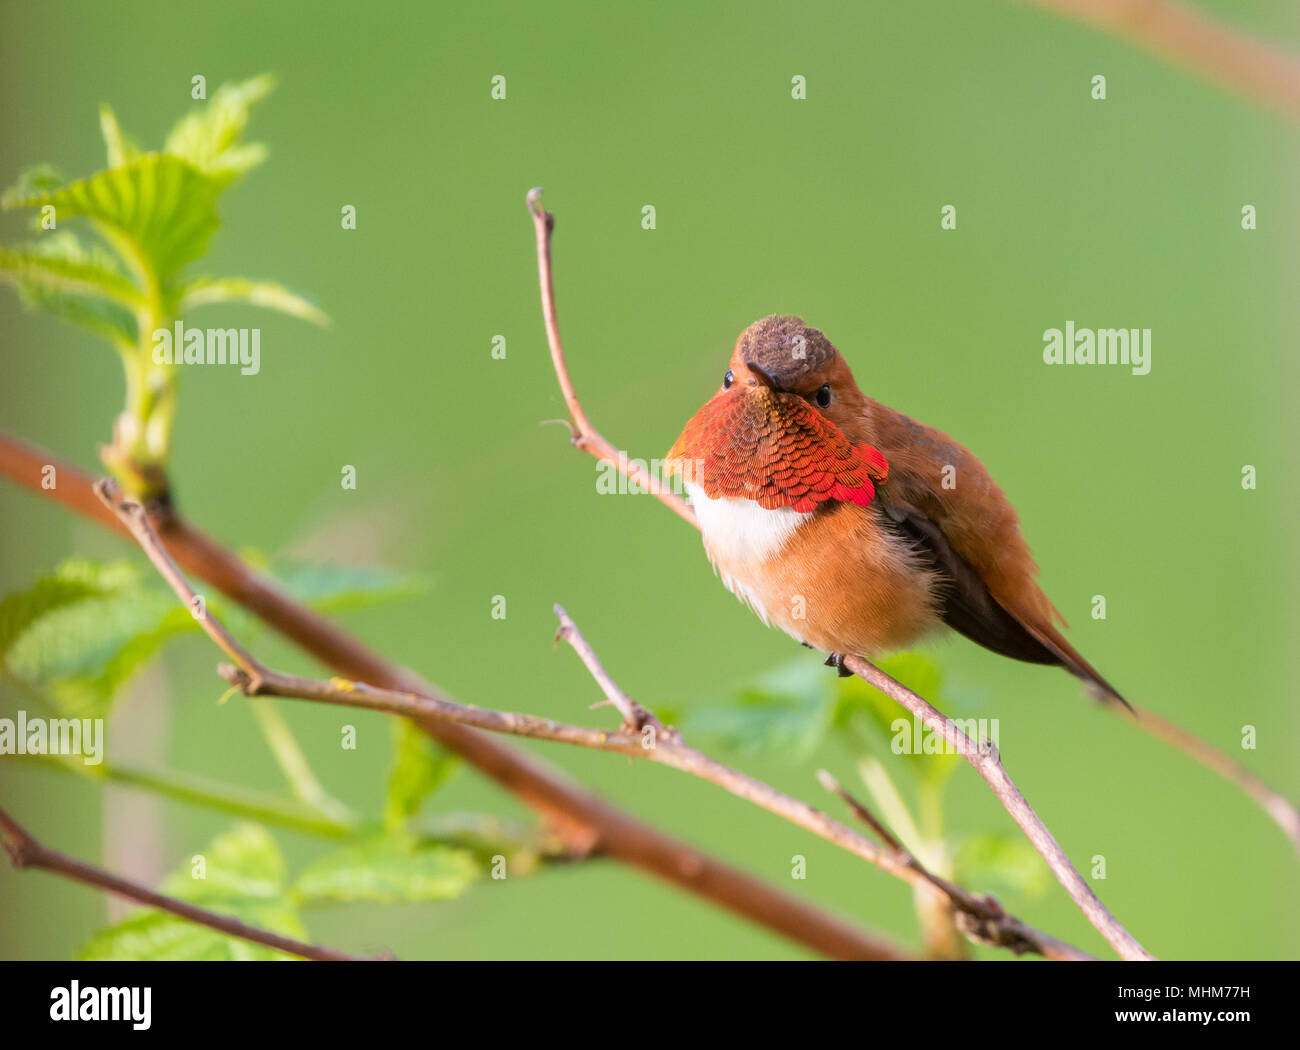 A Rufous Hummingbird (Selasphorus rufus) perched on a twig with a soft green background. Stock Photo